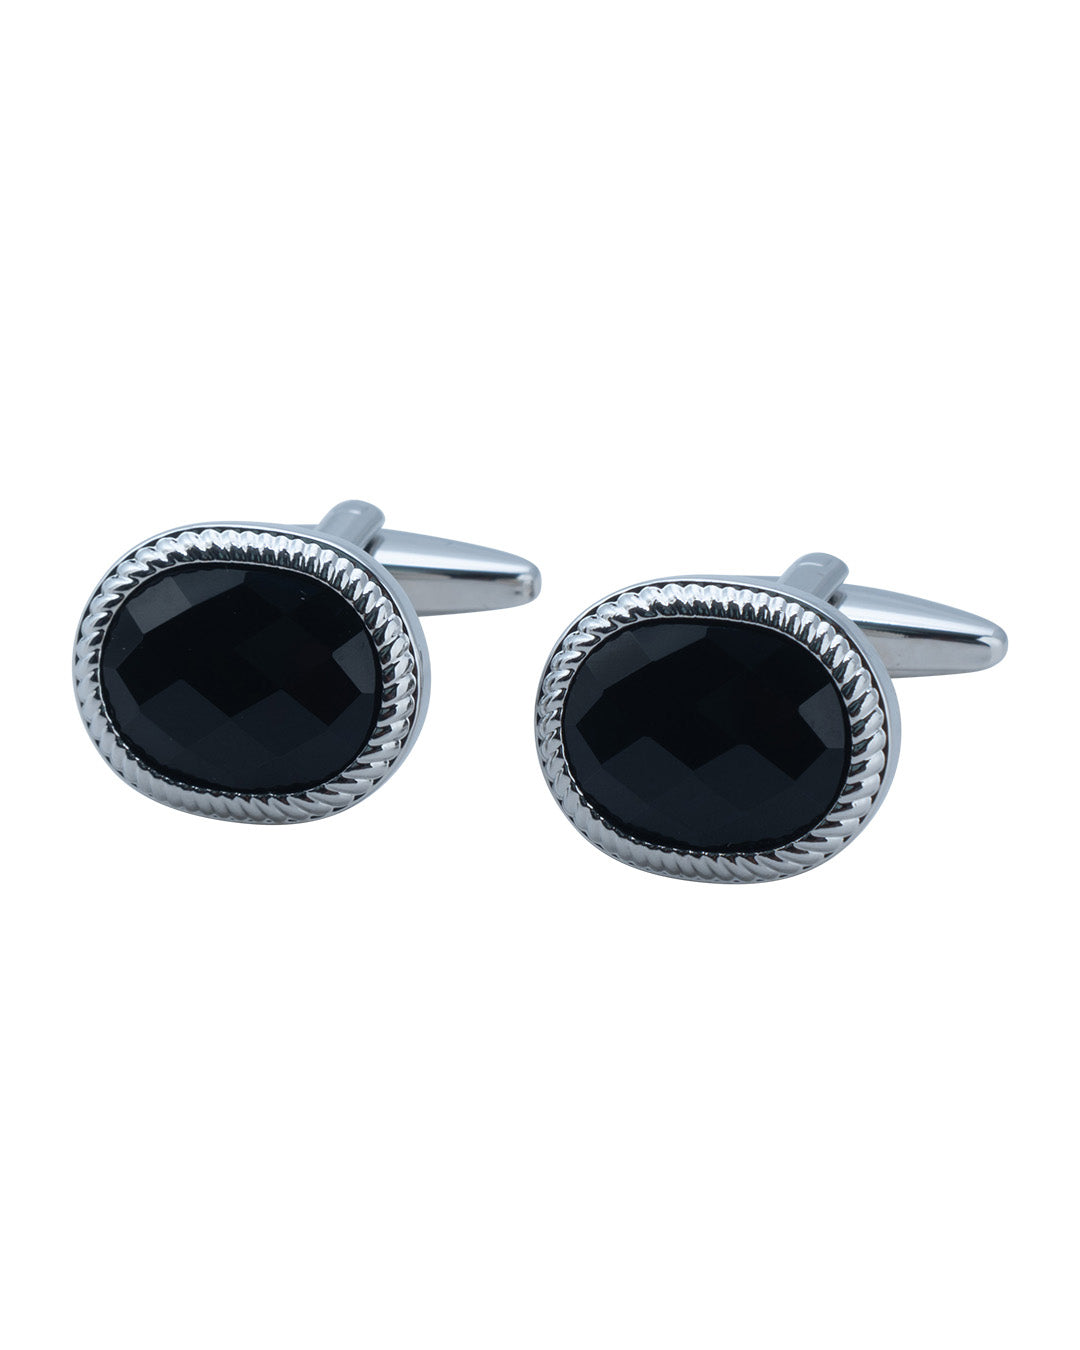 Oval Cufflinks With Textured Edge & Black Faceted Stone